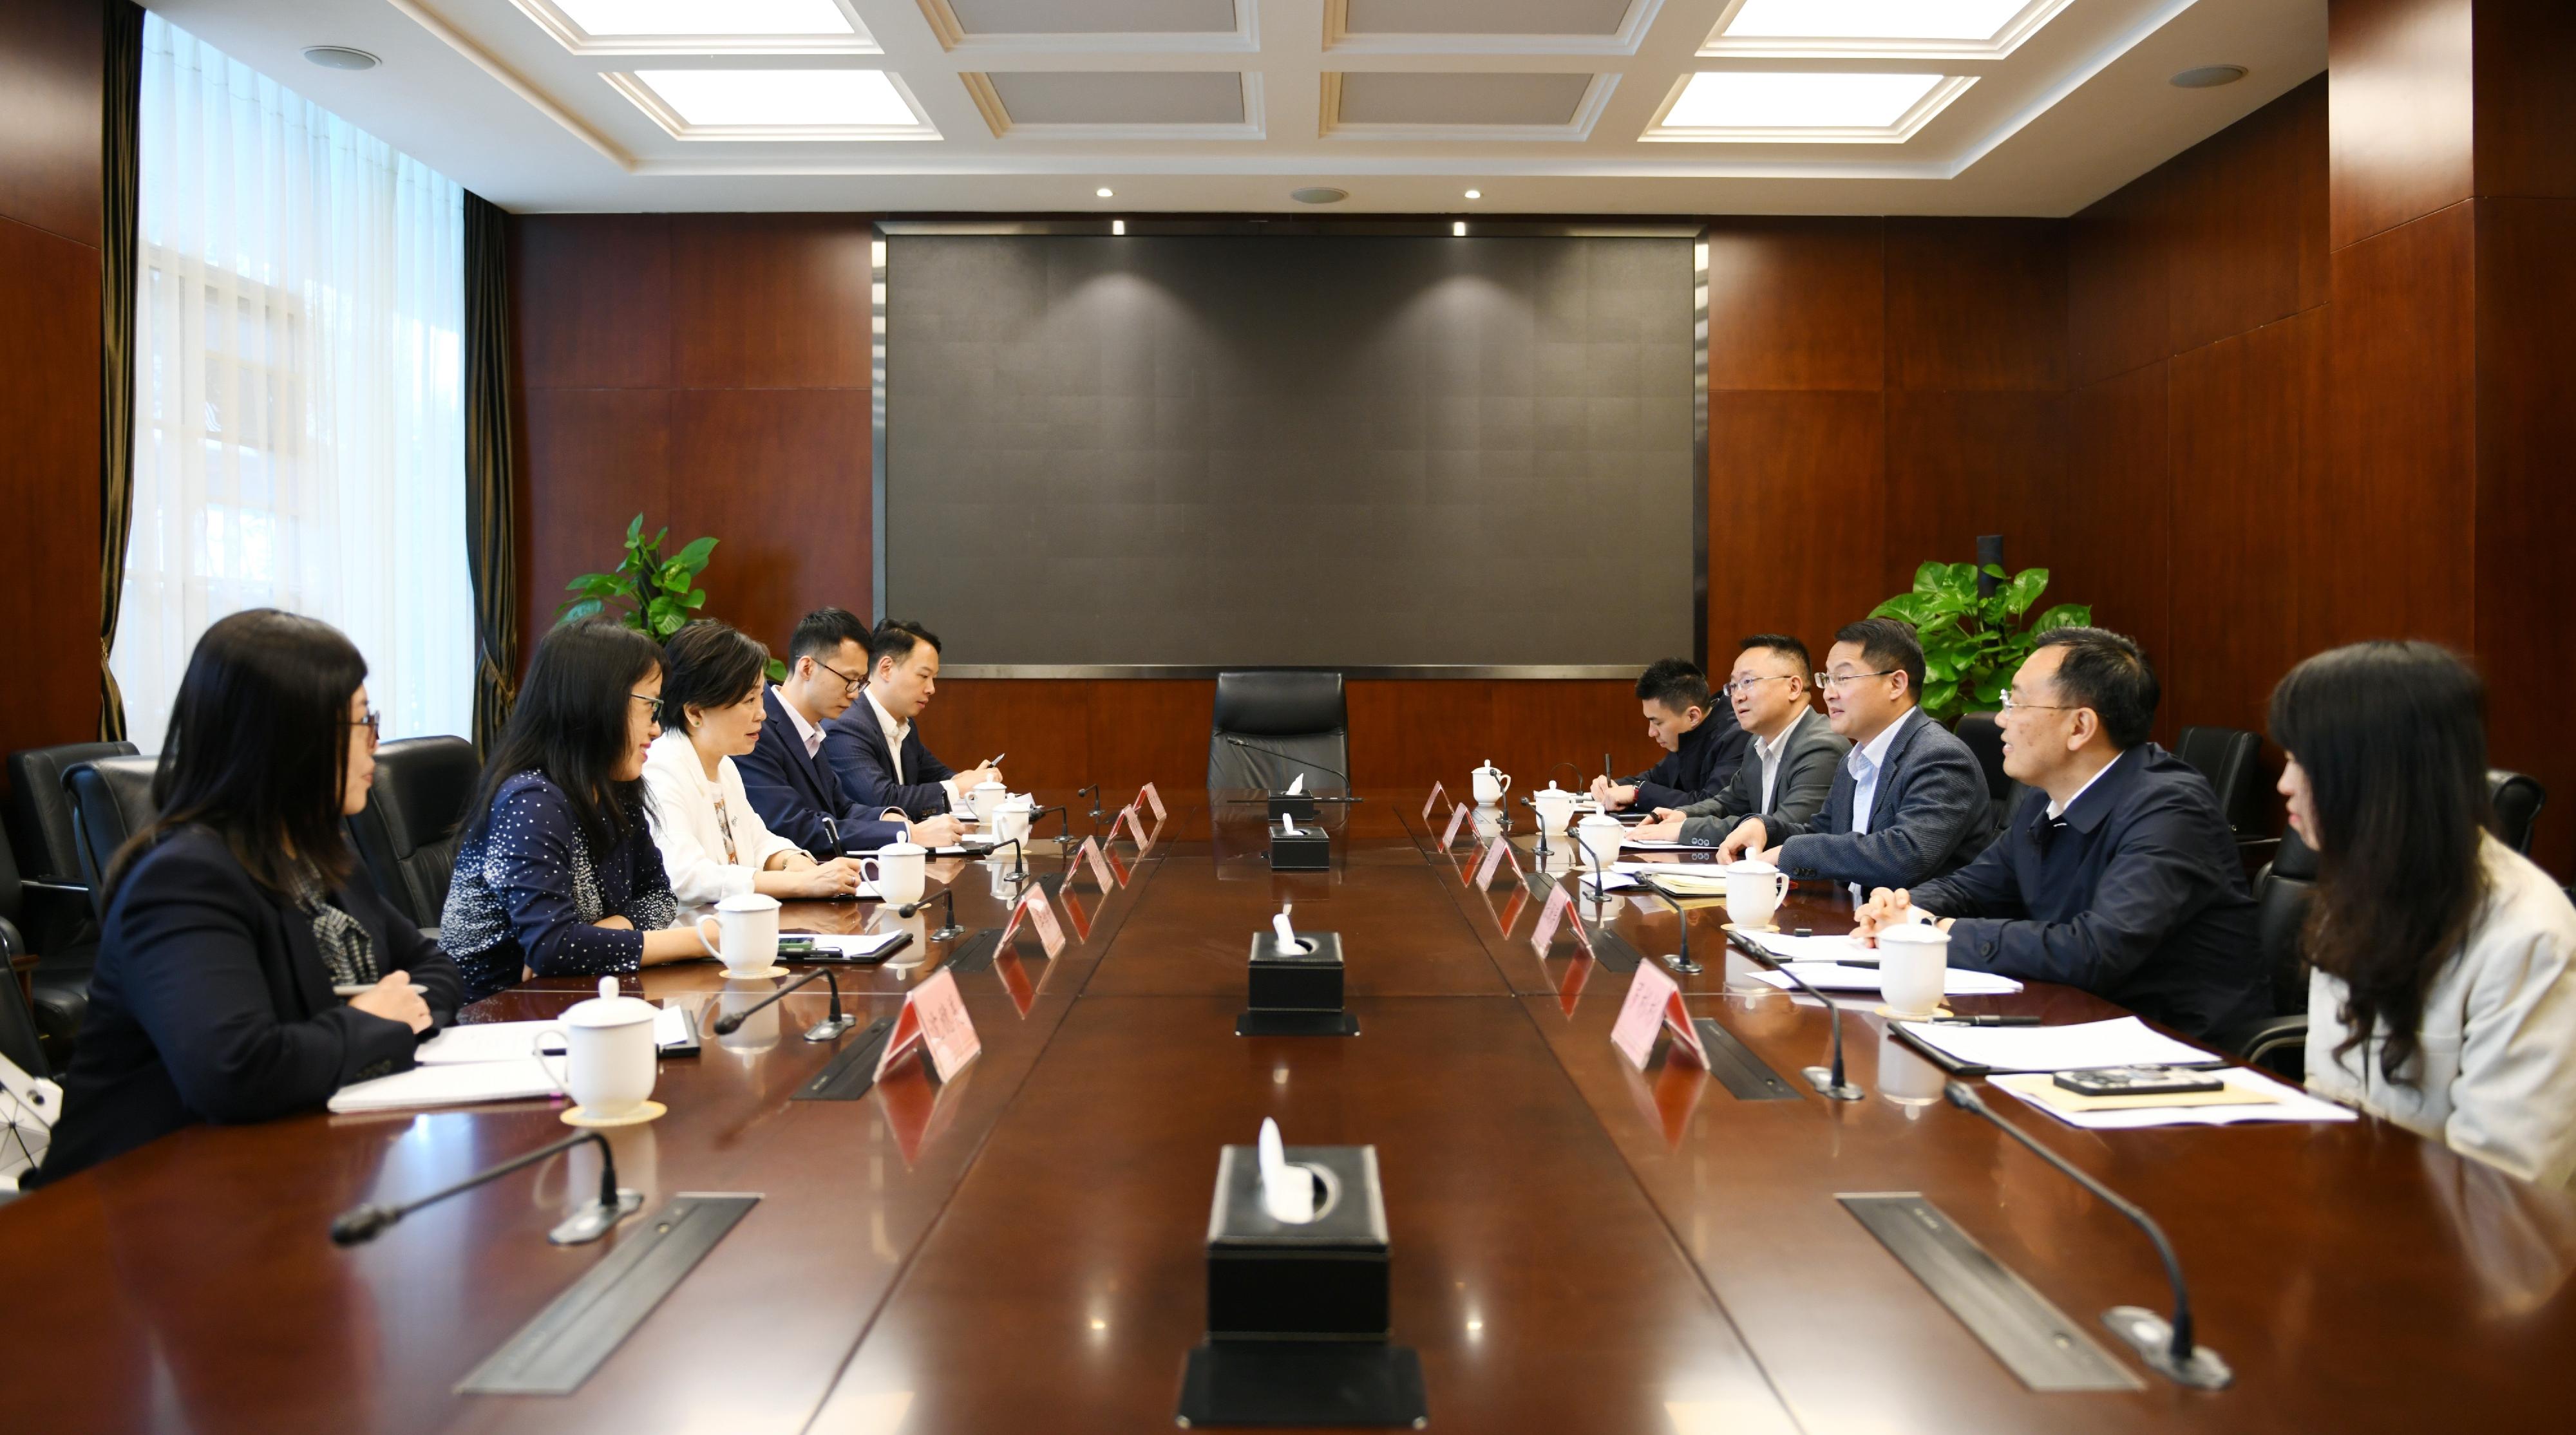 The Secretary for Education, Dr Choi Yuk-lin (third left), calls on Deputy Director of the Hong Kong and Macao Affairs Office of the Sichuan Provincial People's Government Mr Li Hui (third right) and Deputy Secretary of the Education Working Committee of the CPC Sichuan Provincial Committee Mr Zhang Lantao (second right) in Chengdu yesterday (April 26).